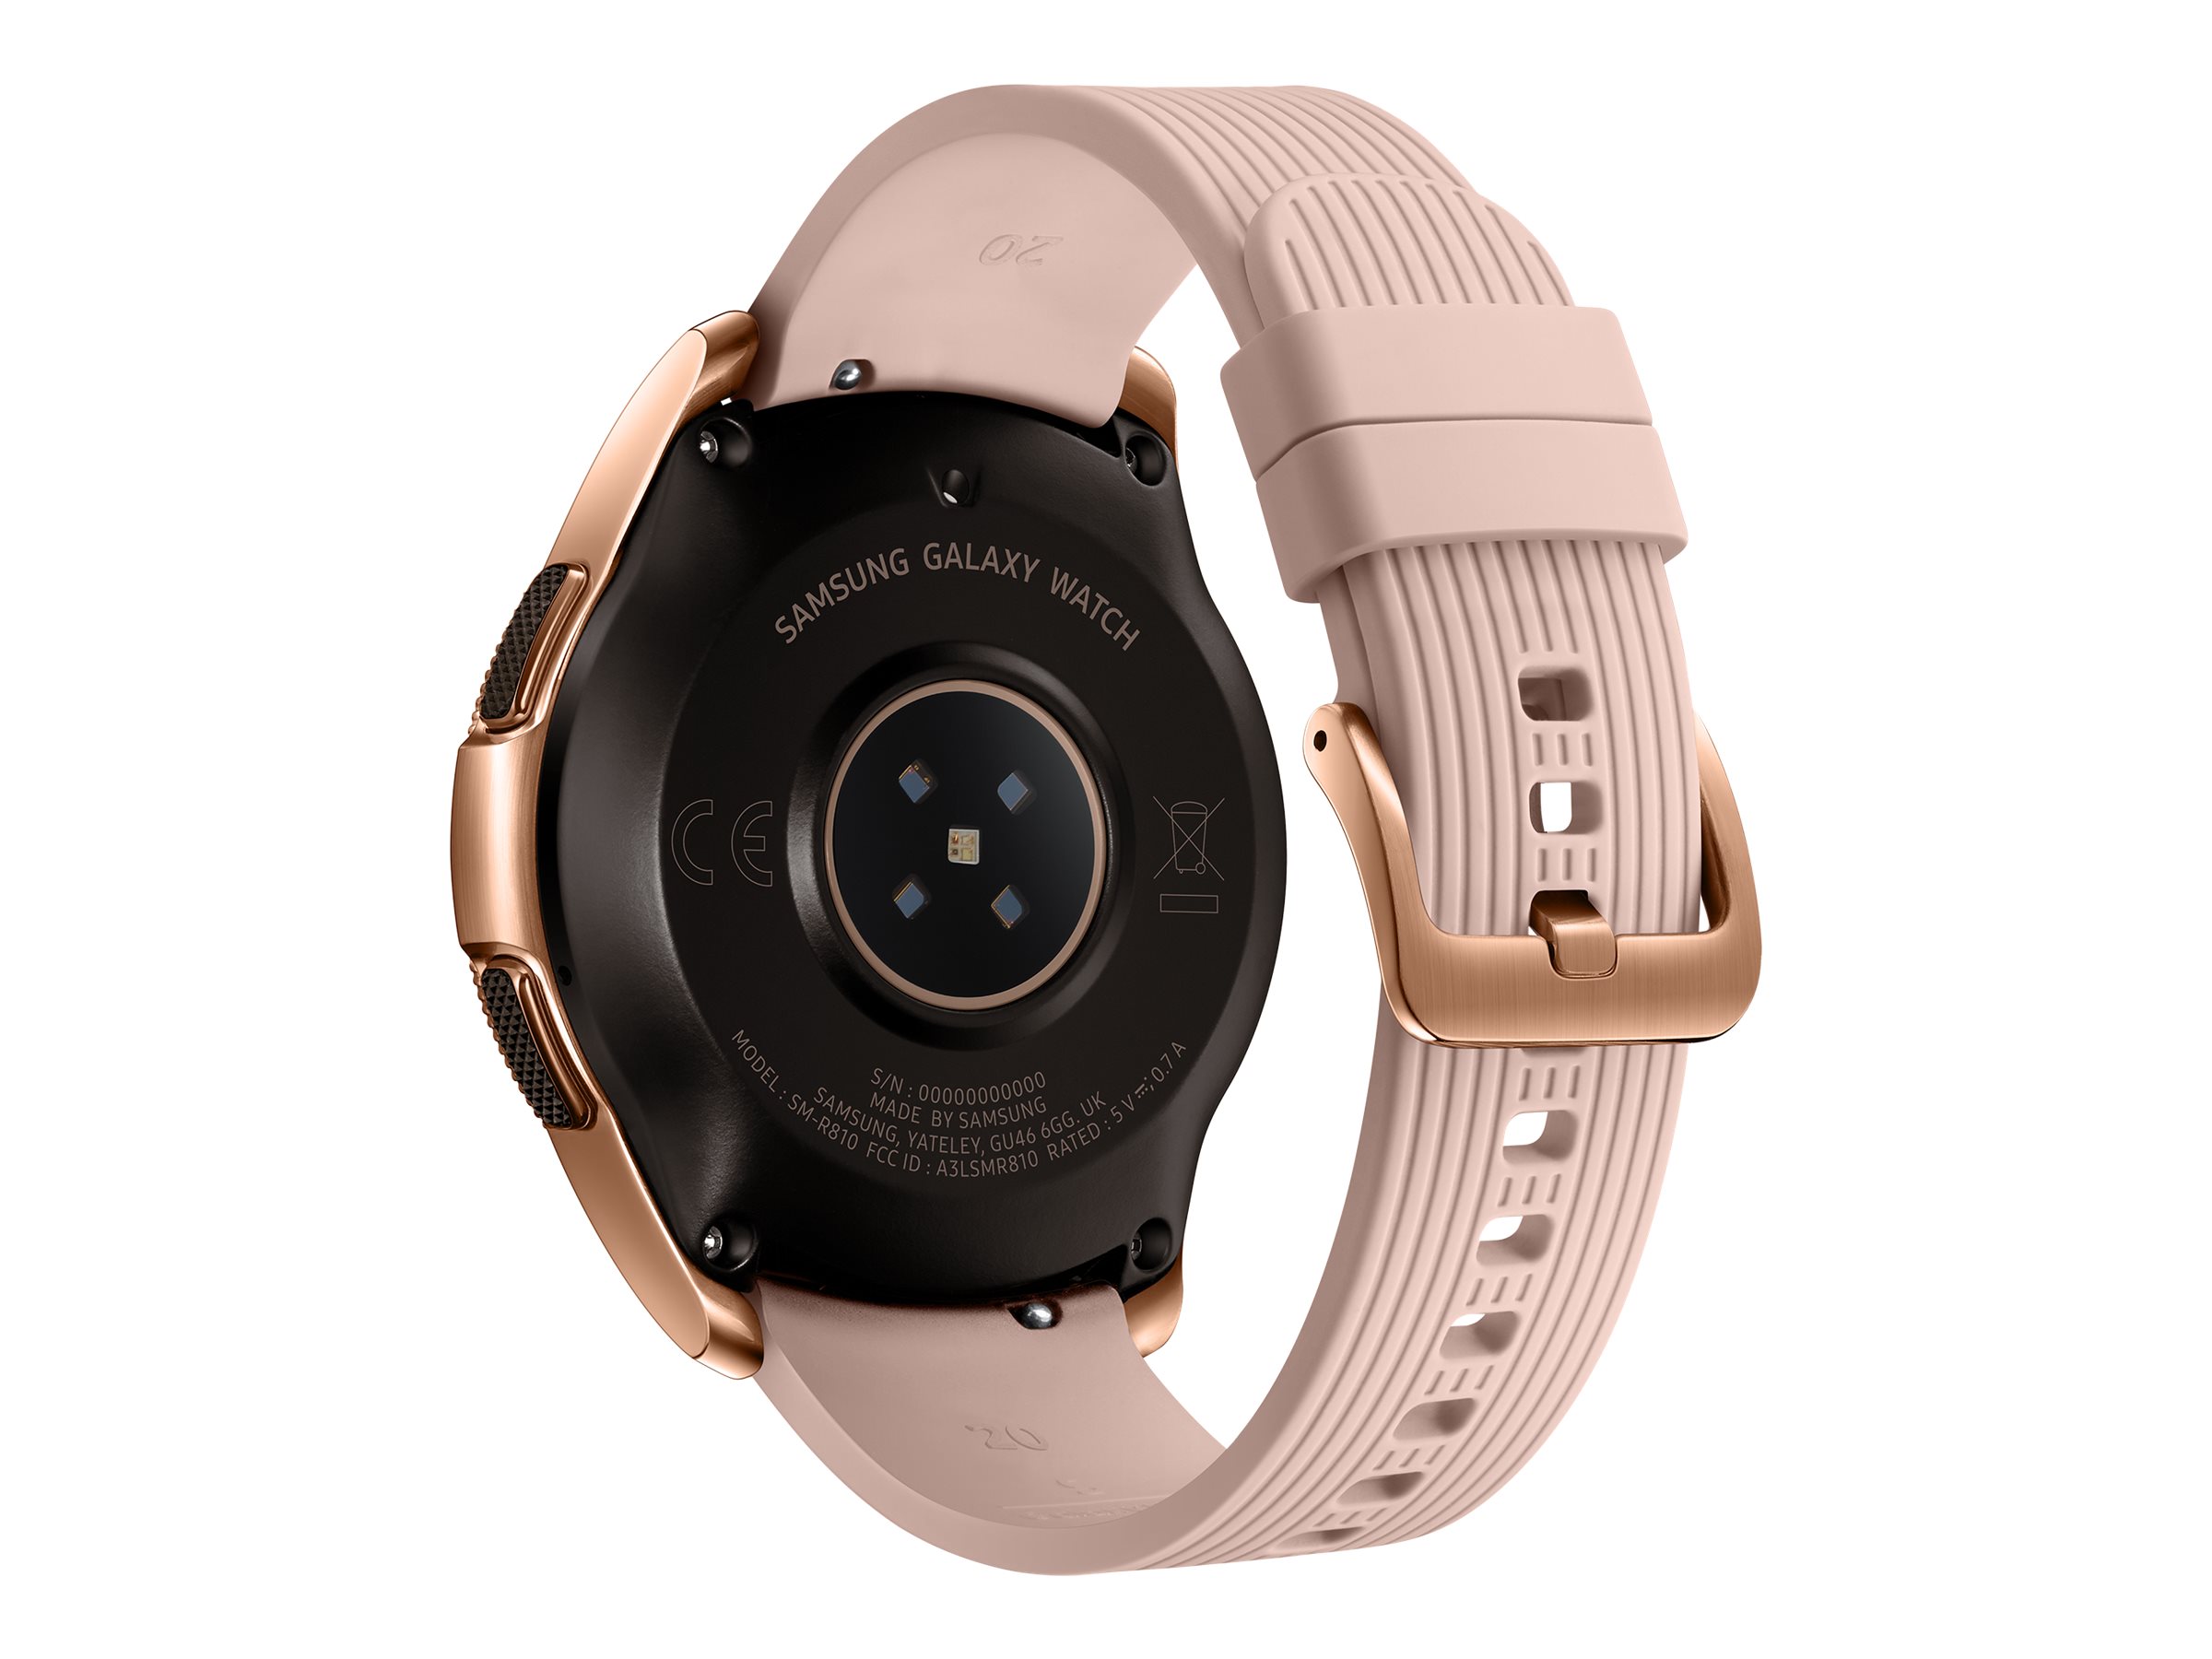 Samsung Galaxy Watch 42mm 4G LTE - Rose Gold - image 3 of 6